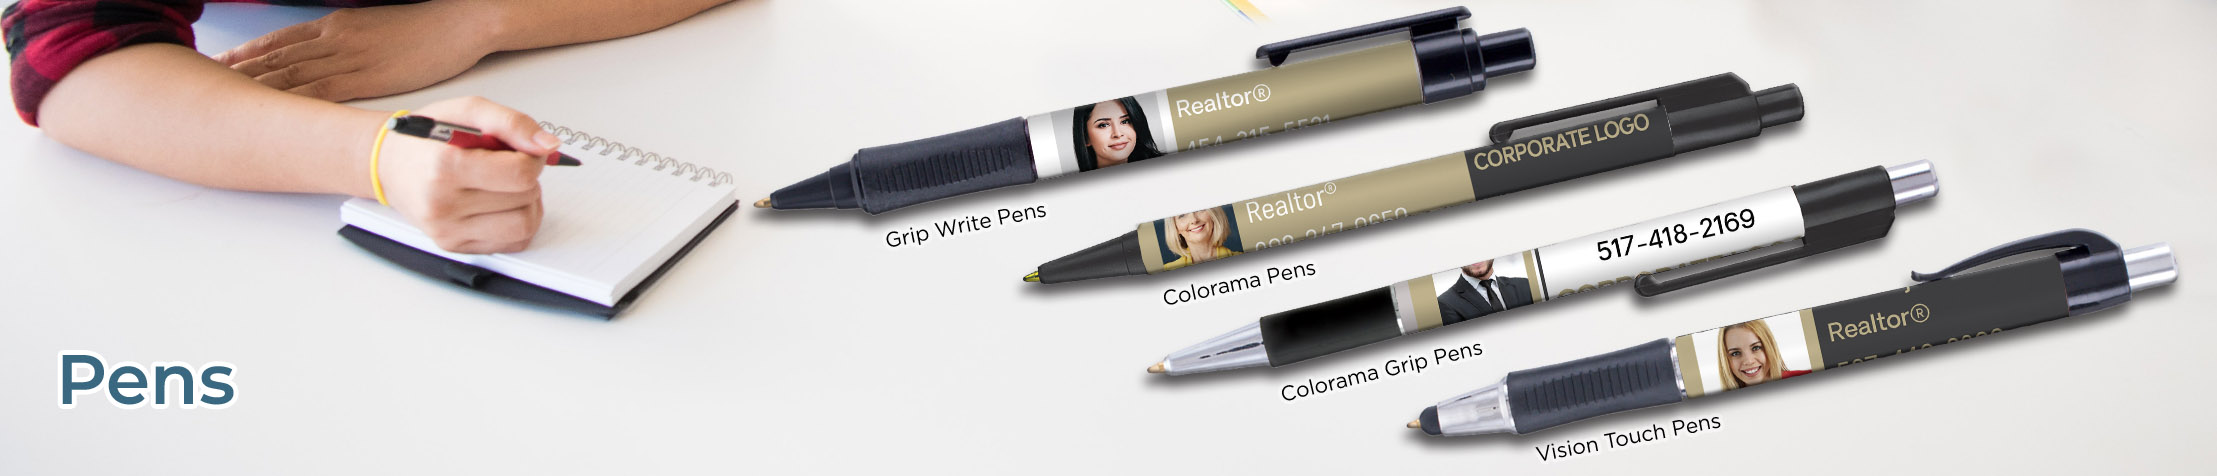 Century 21 Real Estate Pens - Century 21  personalized realtor promotional products | BestPrintBuy.com